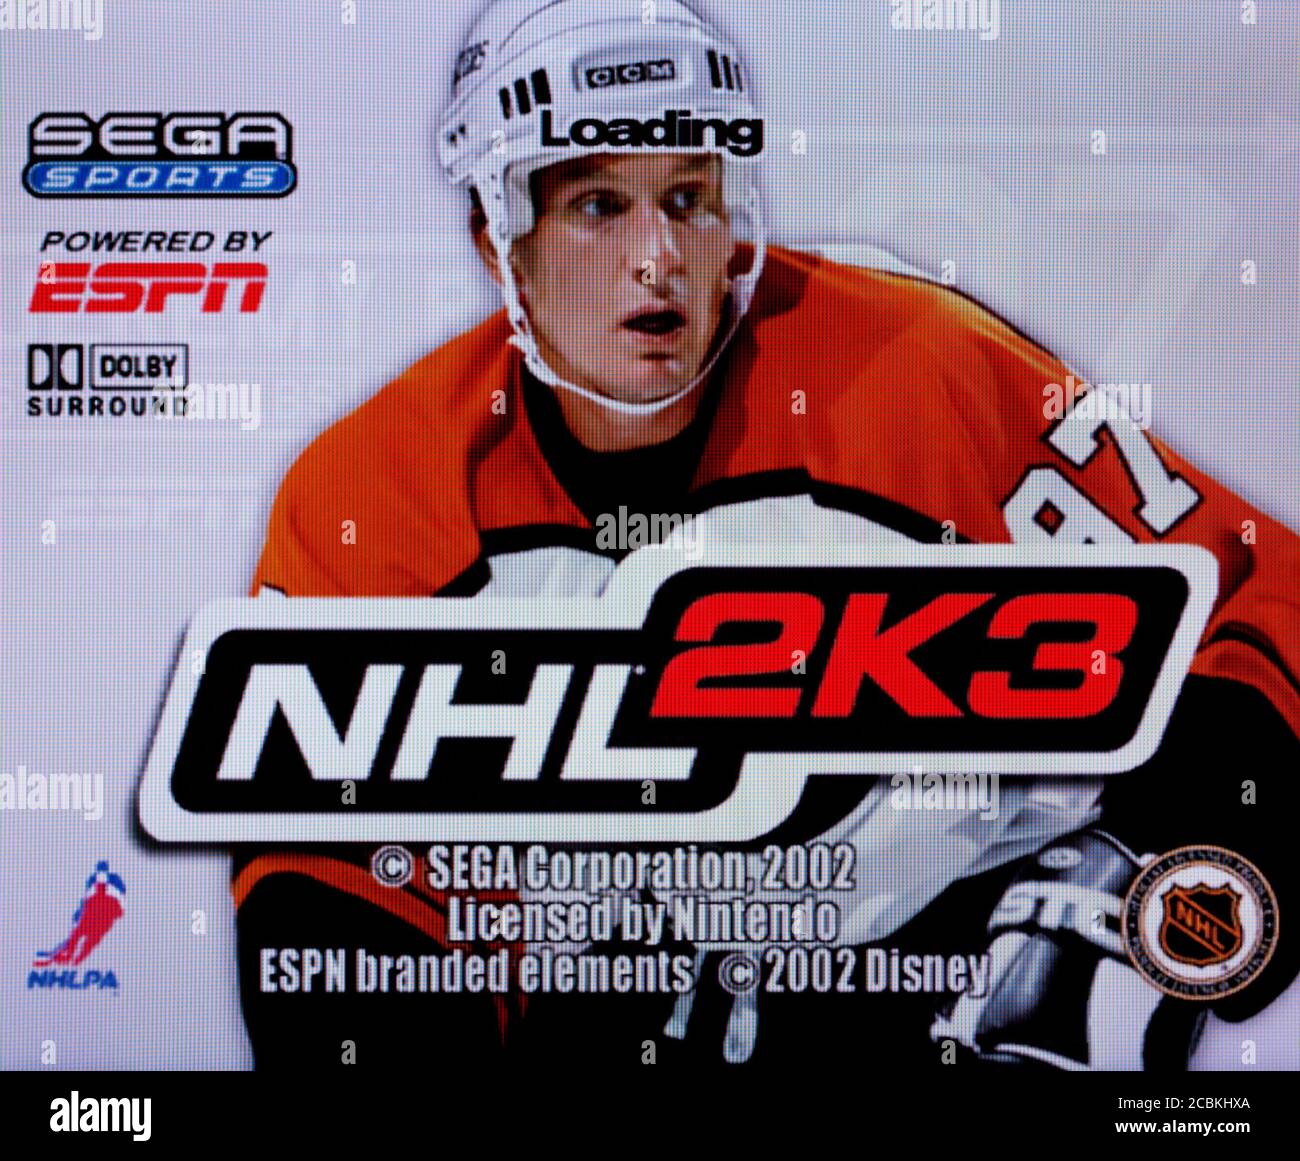 NHL 2k3 - Nintendo Gamecube Videogame - Editorial use only Stock Photo